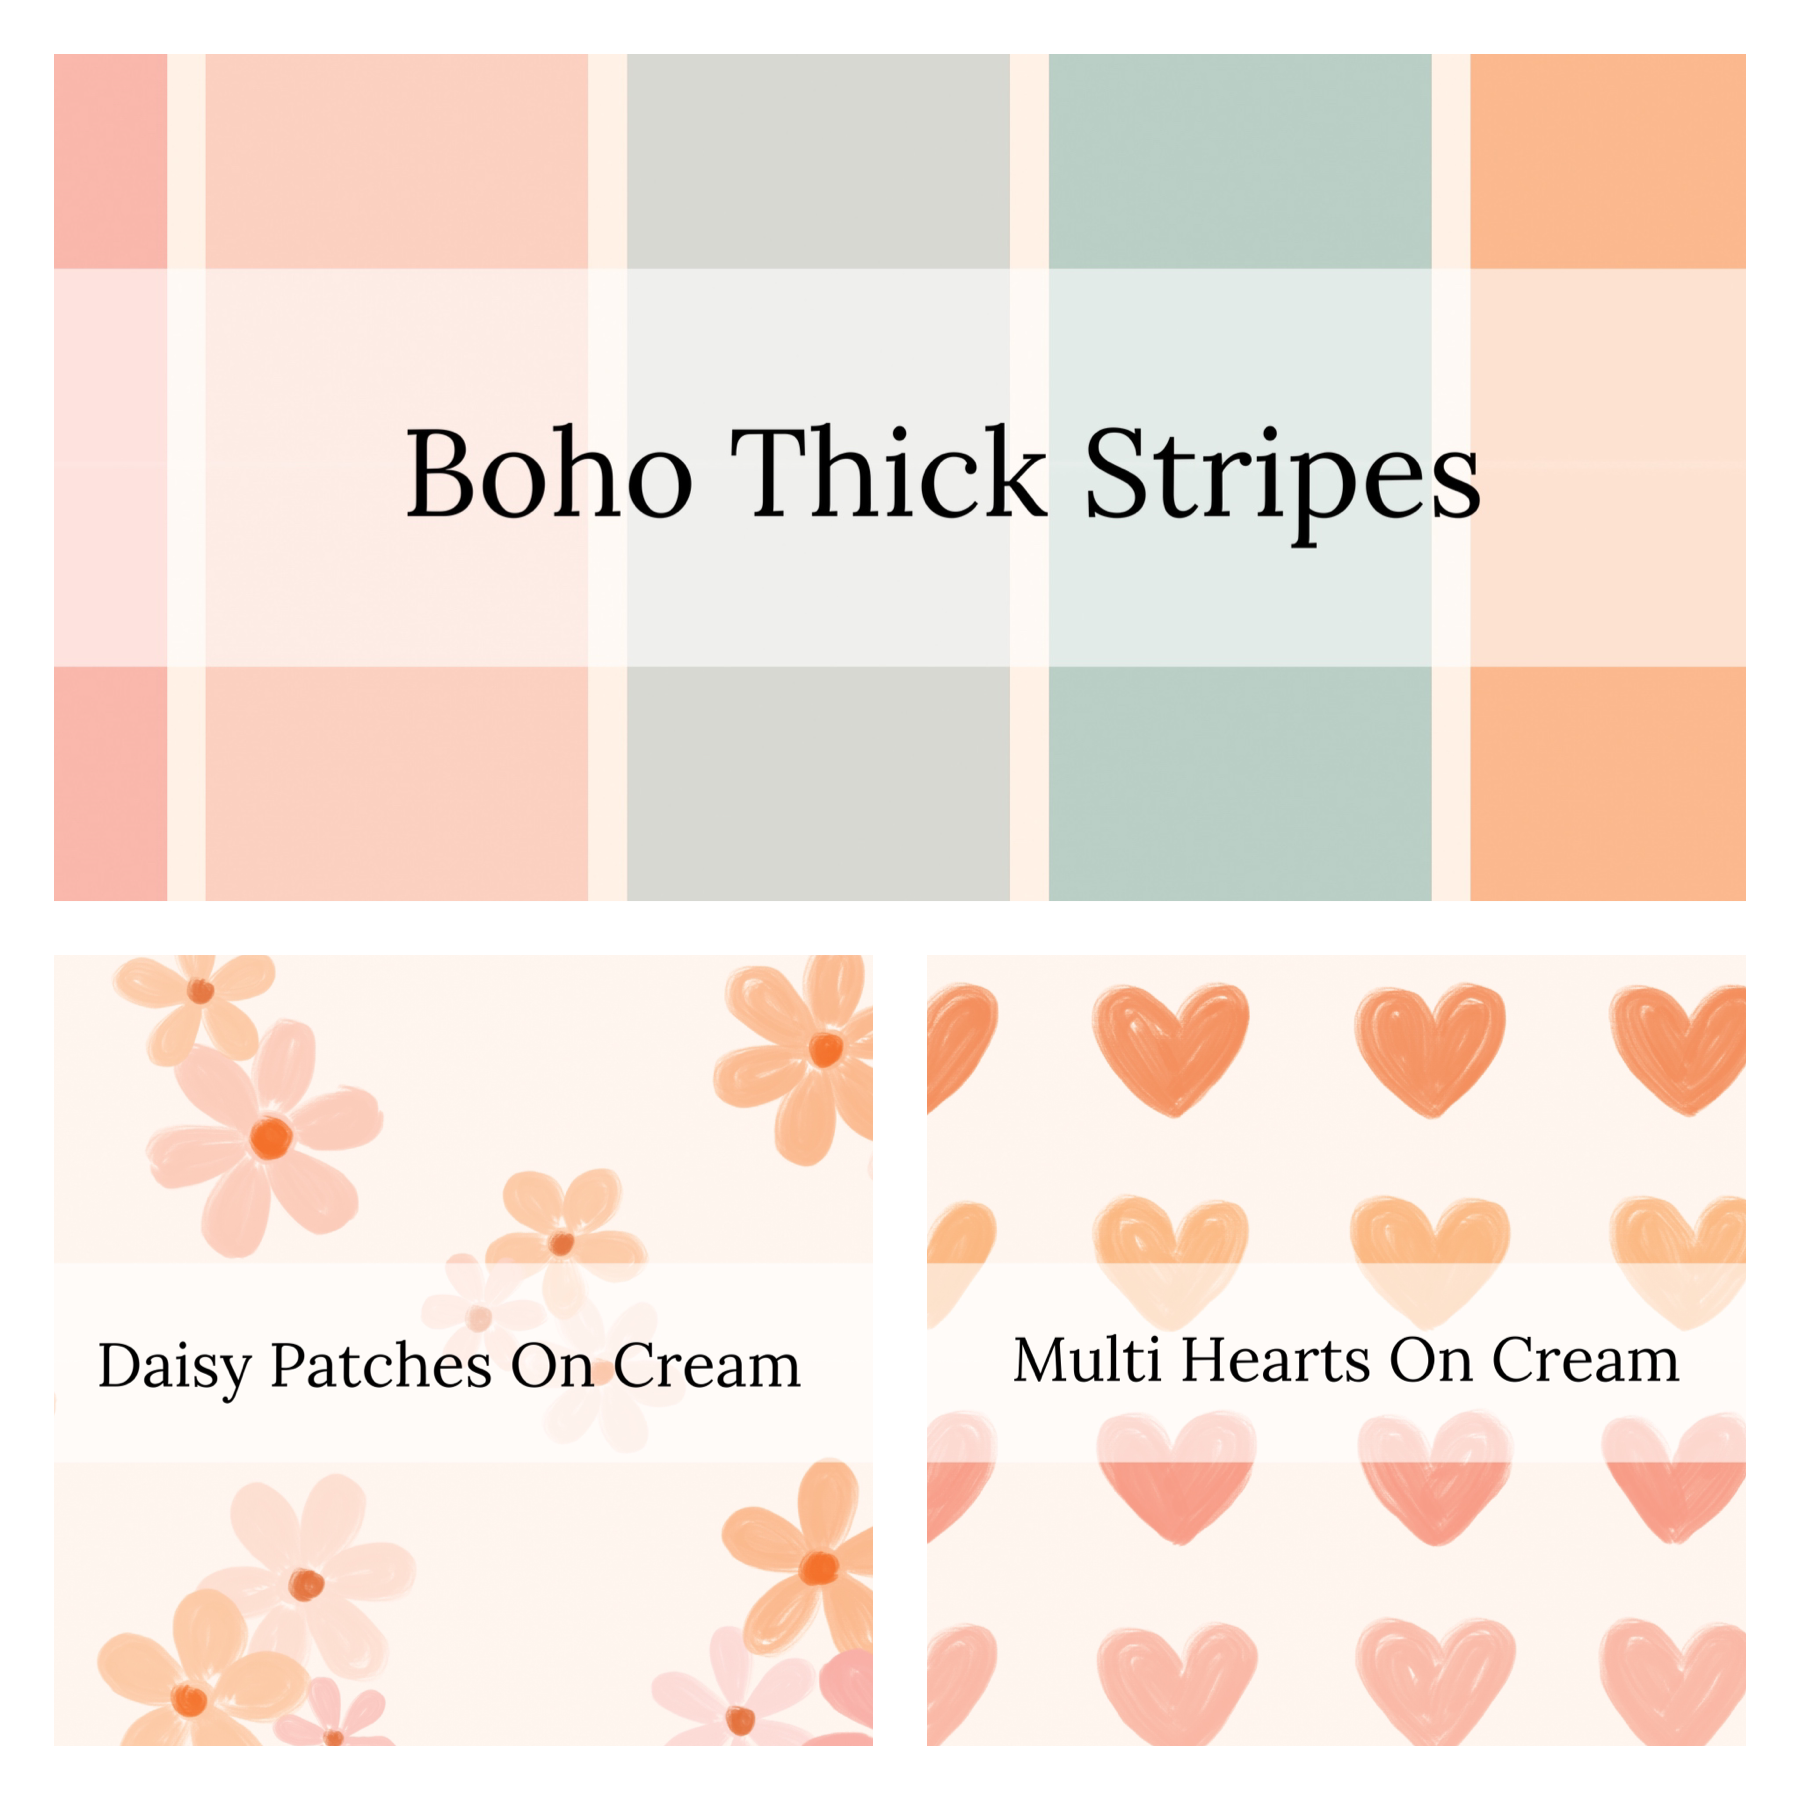 Boho summer themed high quality fabric adaptable for all your crafting needs. Make cute baby headwraps, fun girl hairbows, knotted headbands for adults or kids, clothing, and more!